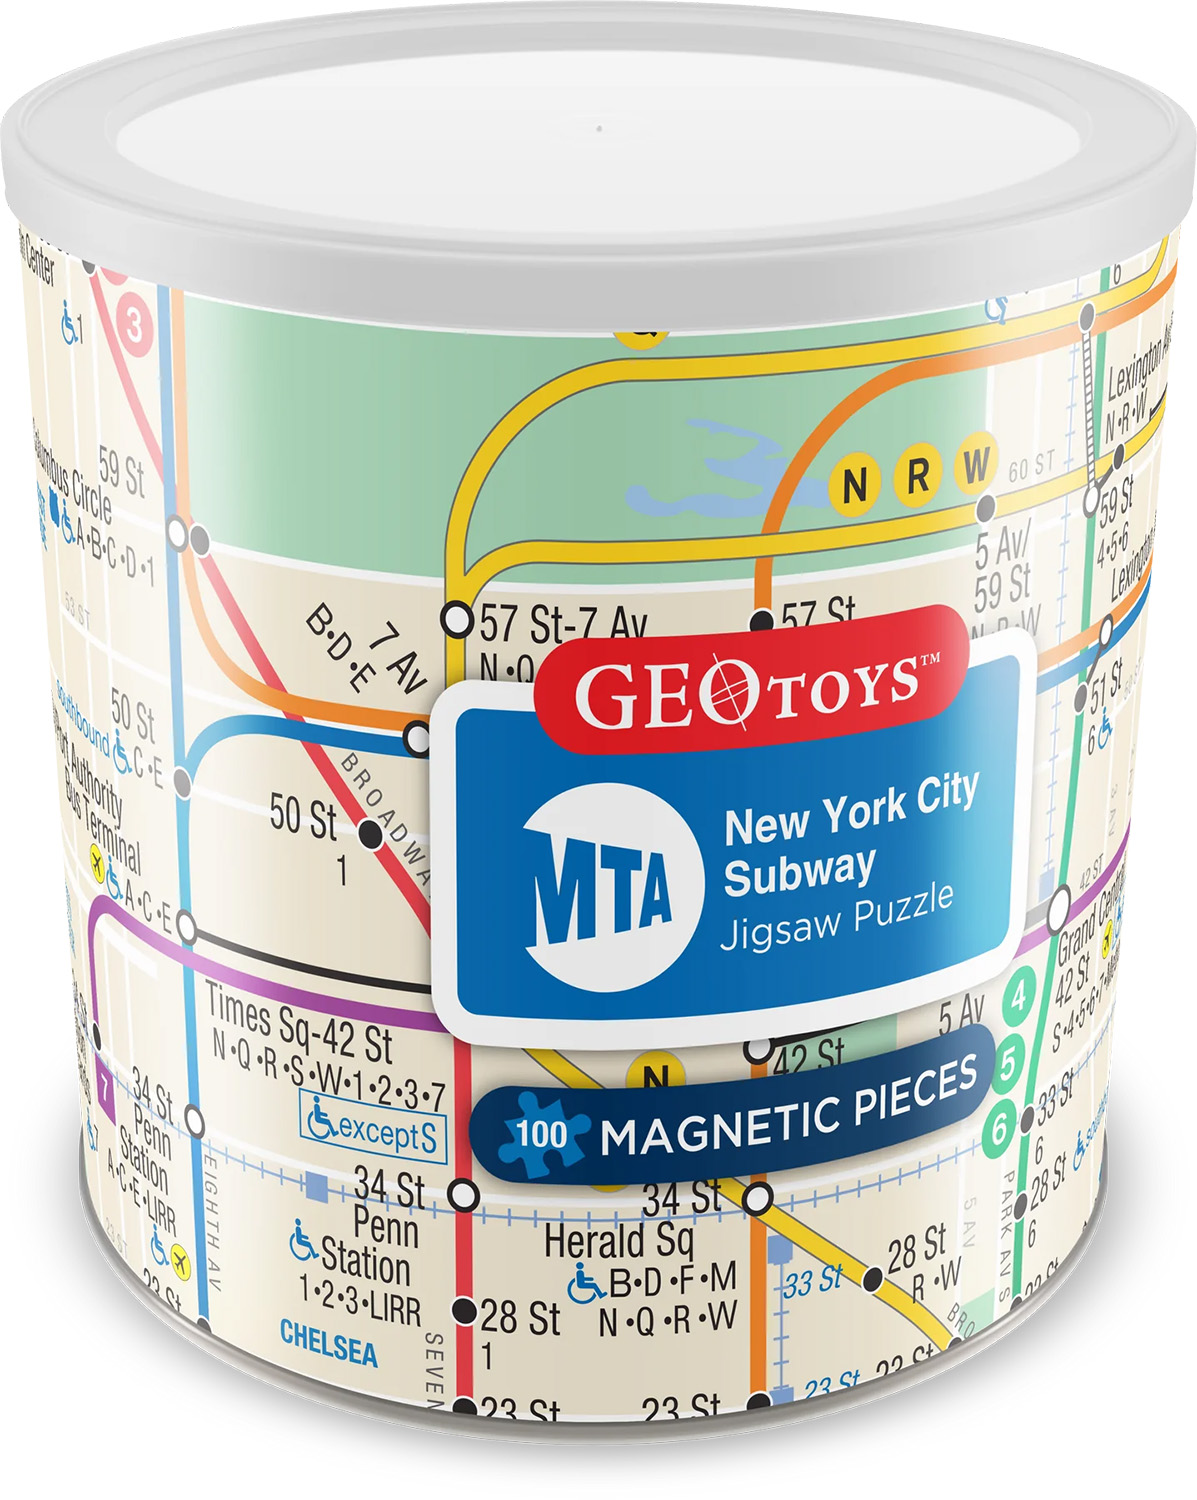 New York City Subway - Magnetic Puzzle Maps & Geography Jigsaw Puzzle